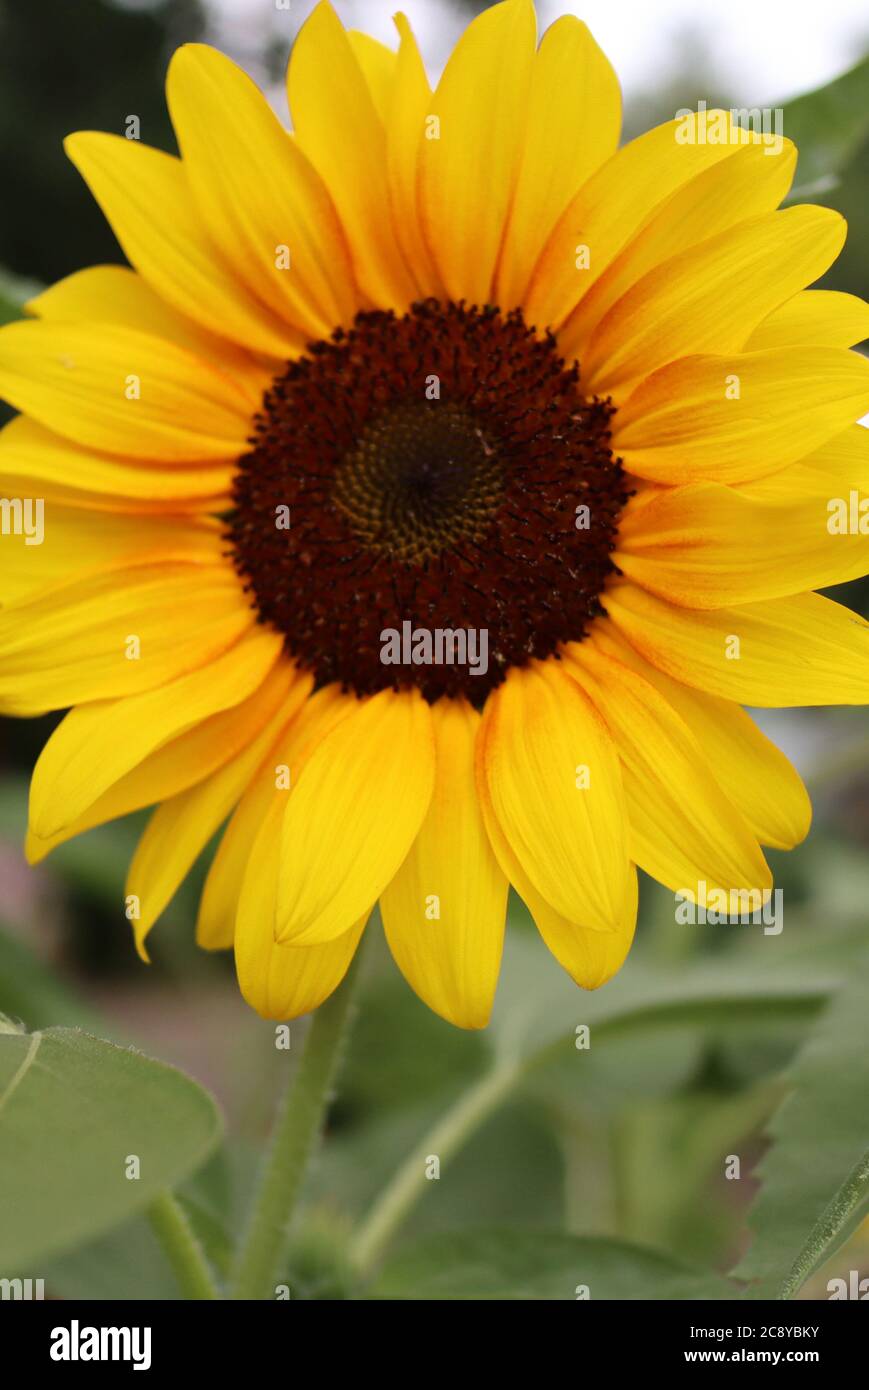 The sunflower is a bright yellow color. Stock Photo